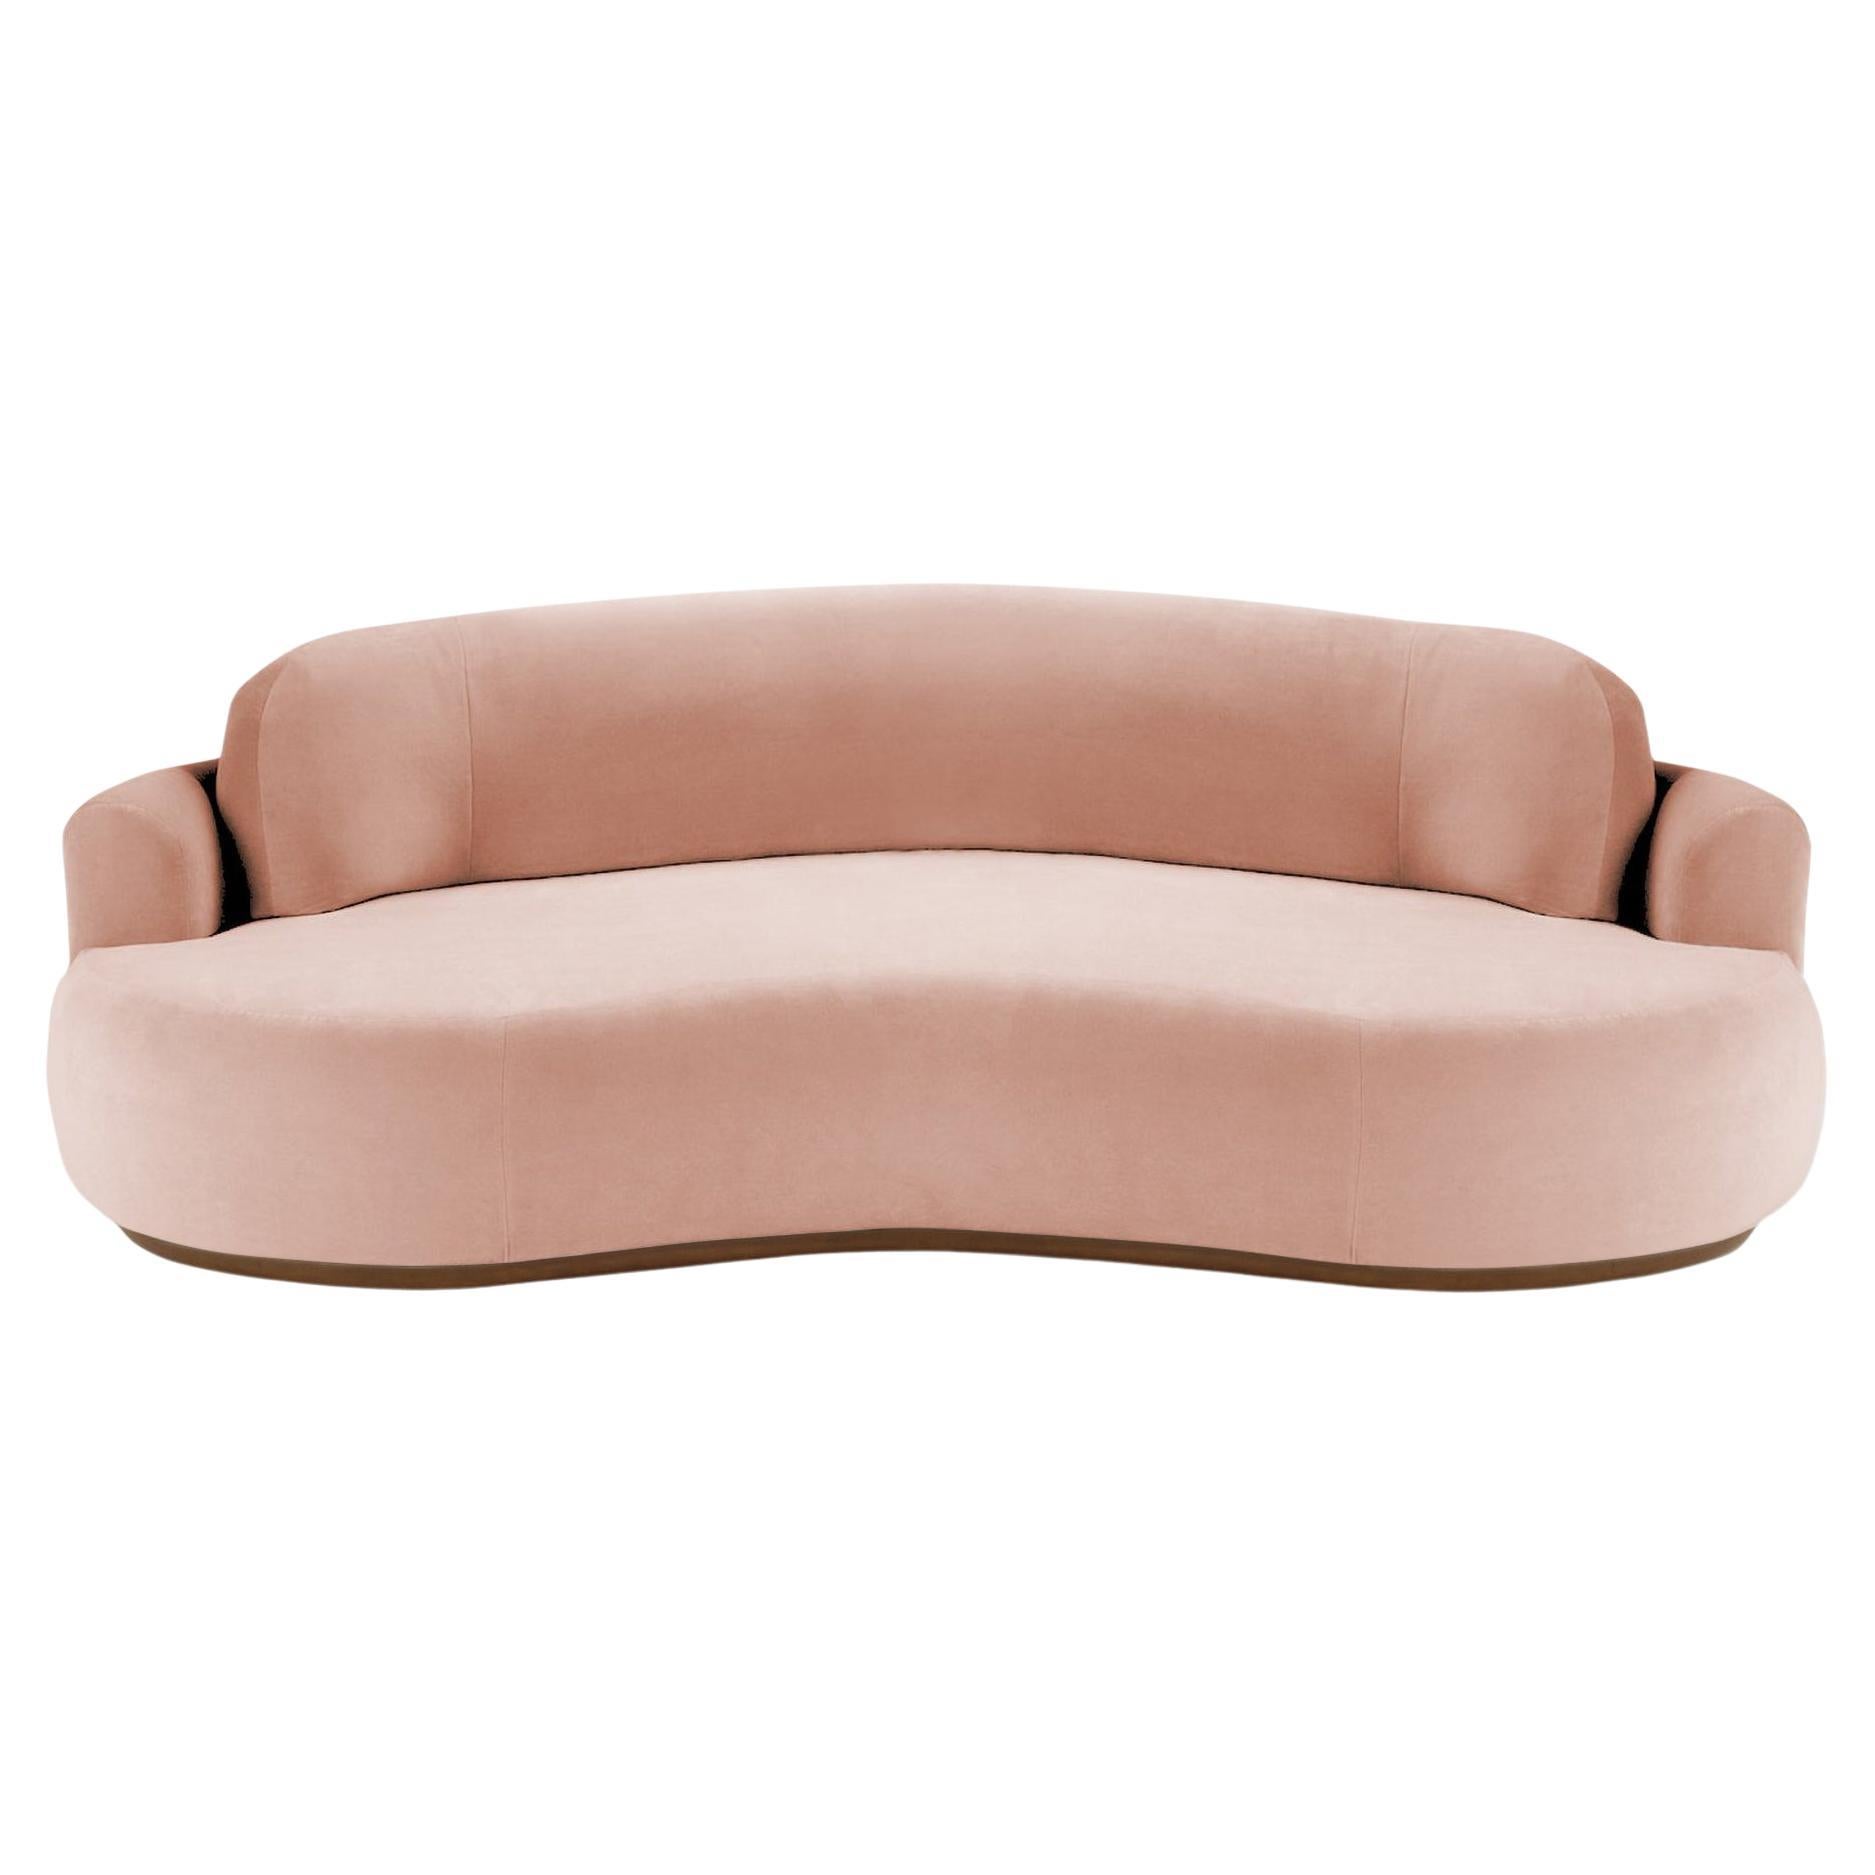 Naked Curved Sofa, Small with Beech Ash-056-1 and Vigo Blossom For Sale